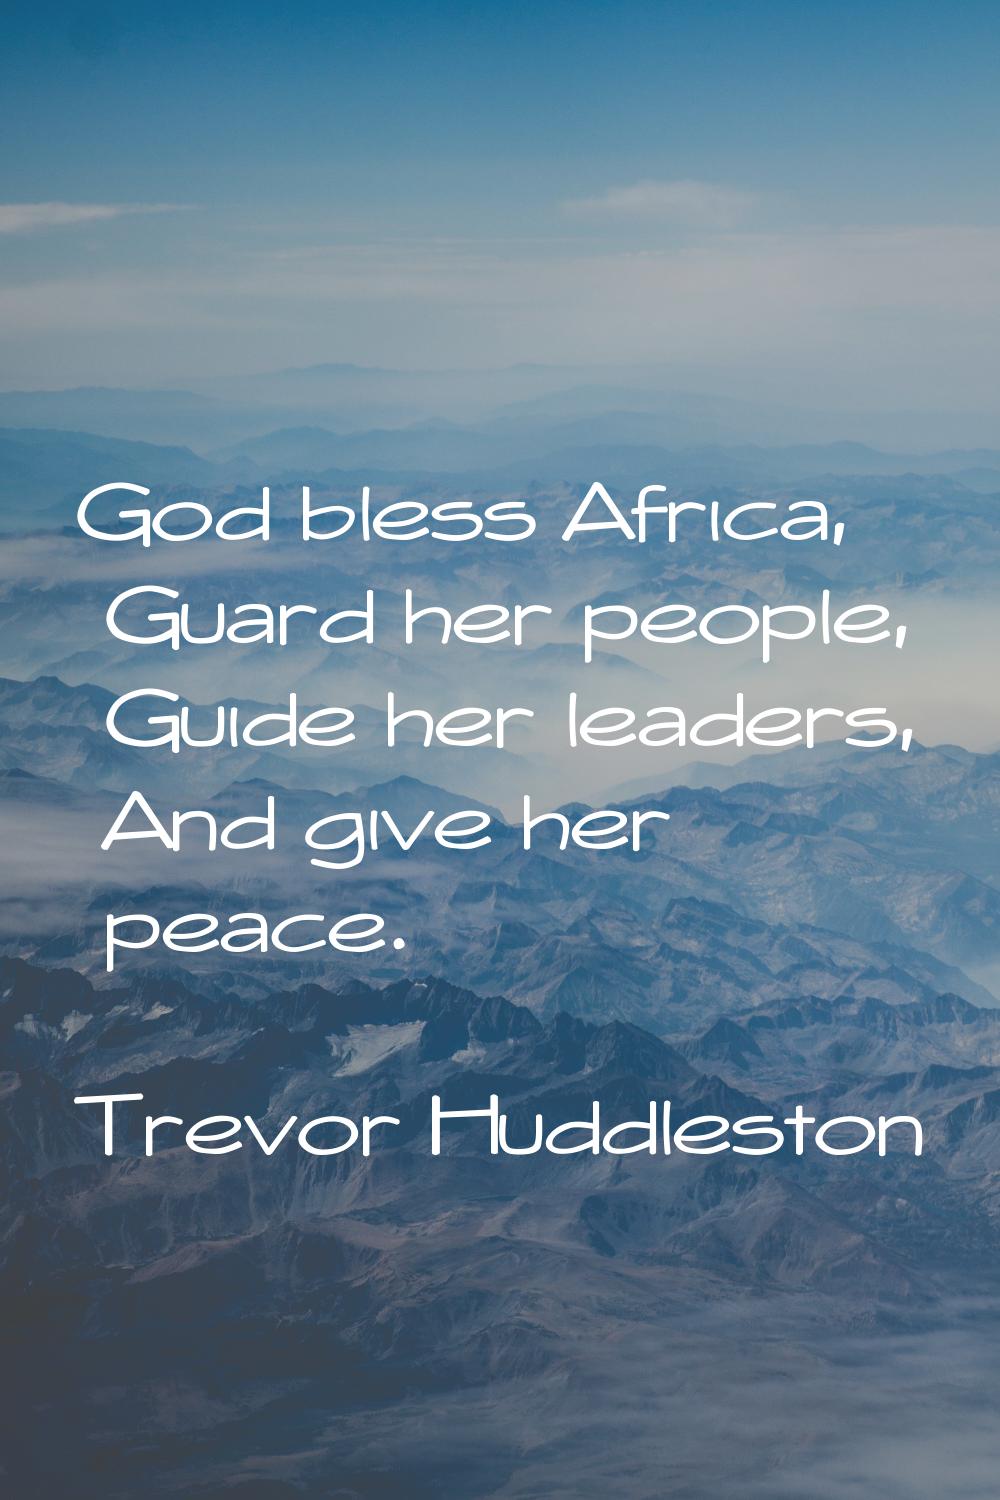 God bless Africa, Guard her people, Guide her leaders, And give her peace.